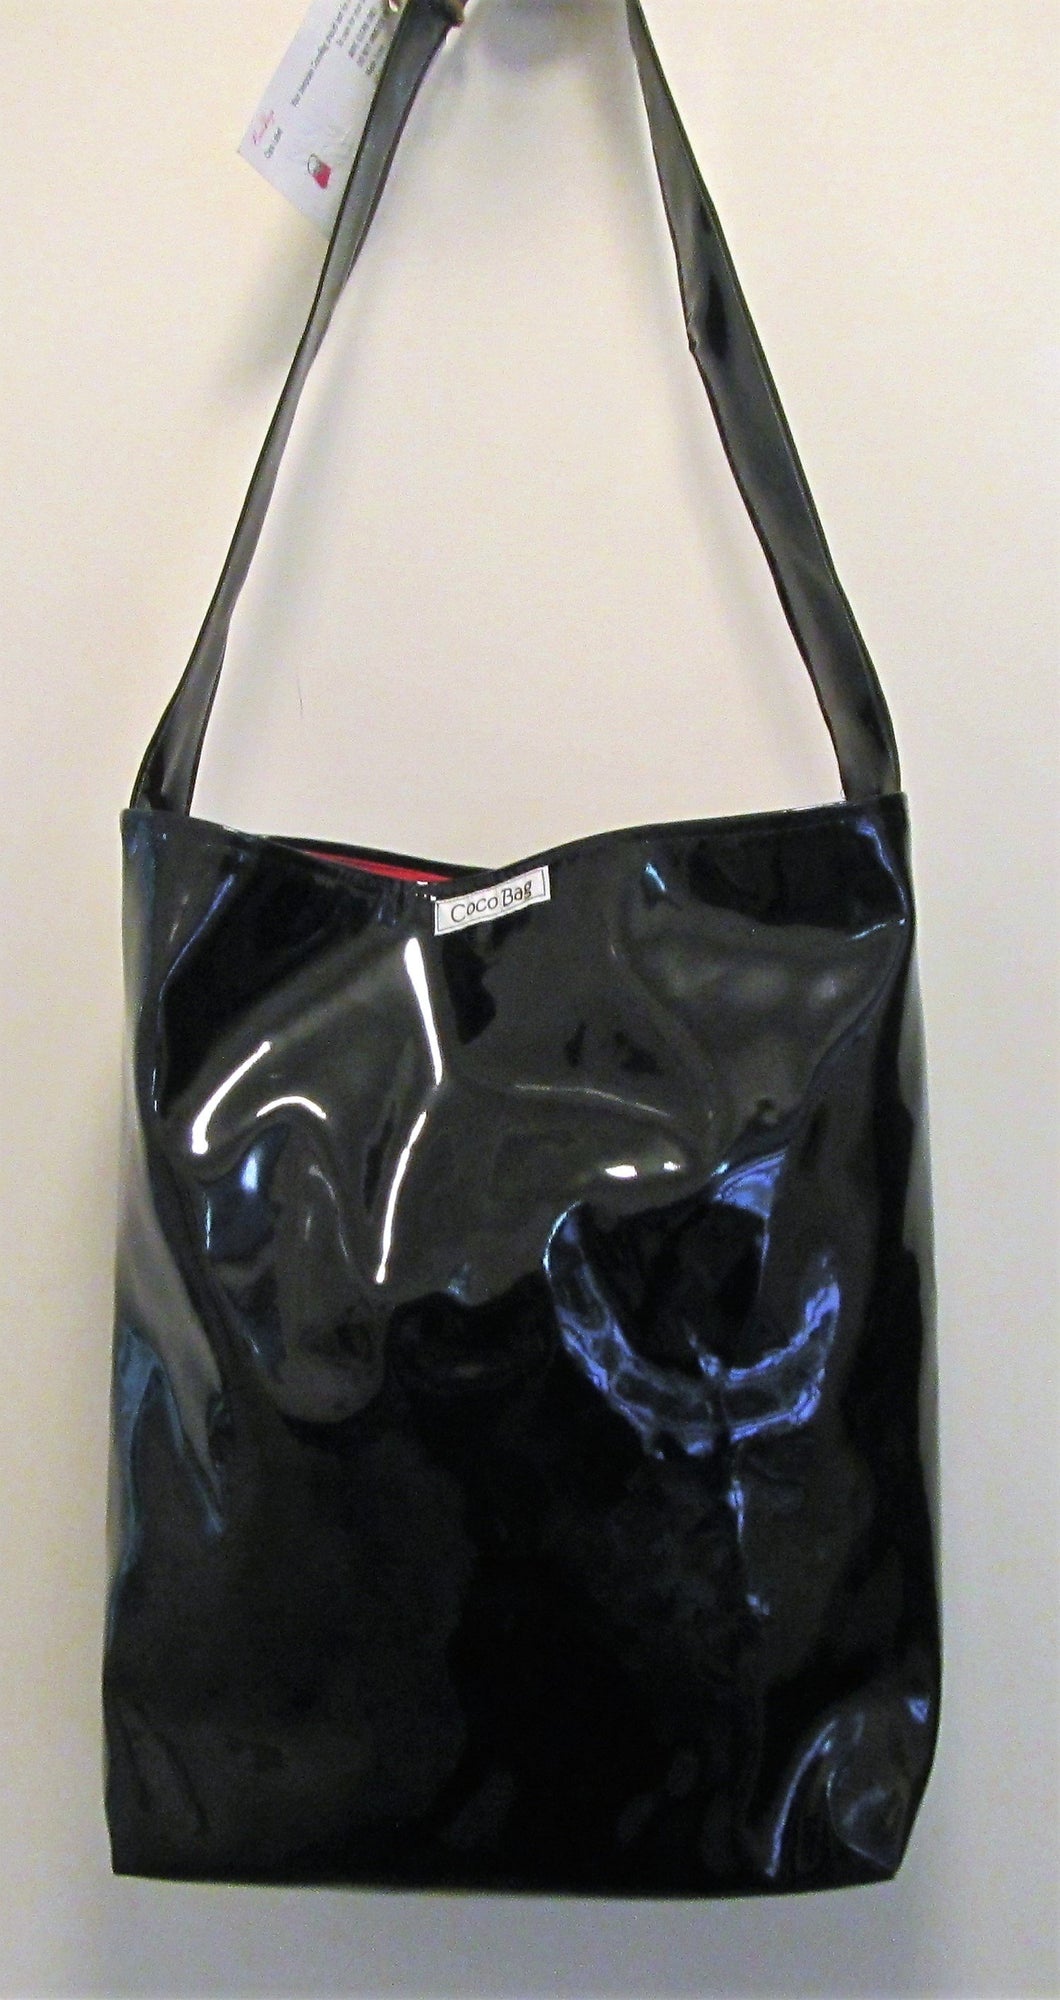 Beautiful handcrafted black patent handbag with one handle